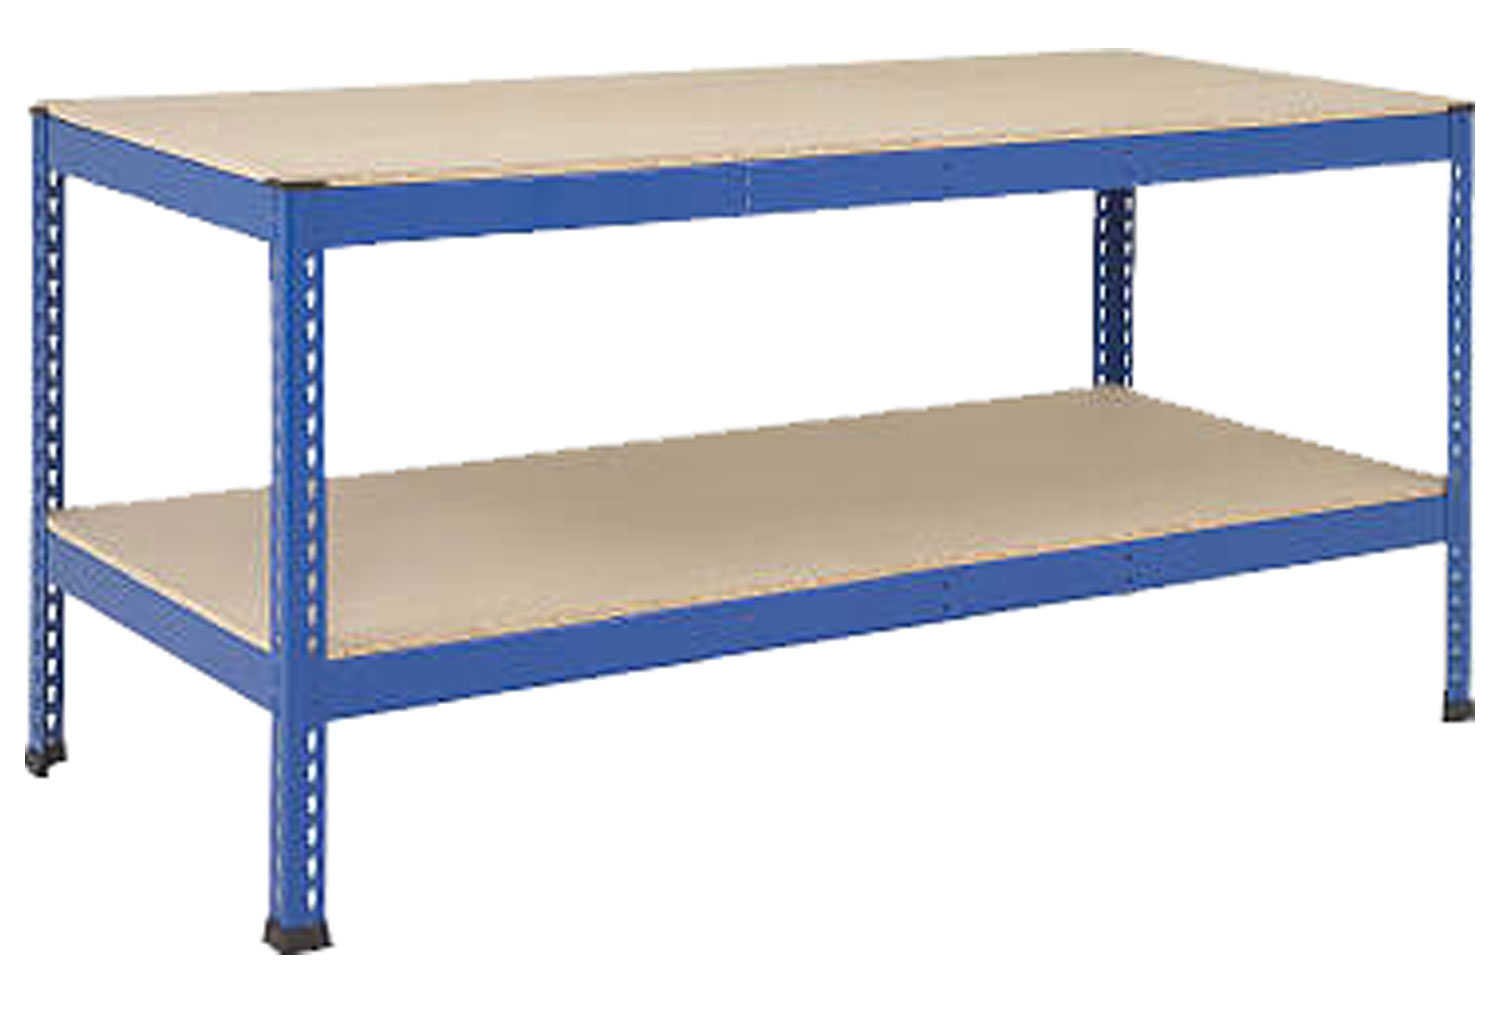 Rapid 1 Heavy Duty Workbench (Blue), 1220wx760dx915h (mm), Blue, Express Delivery